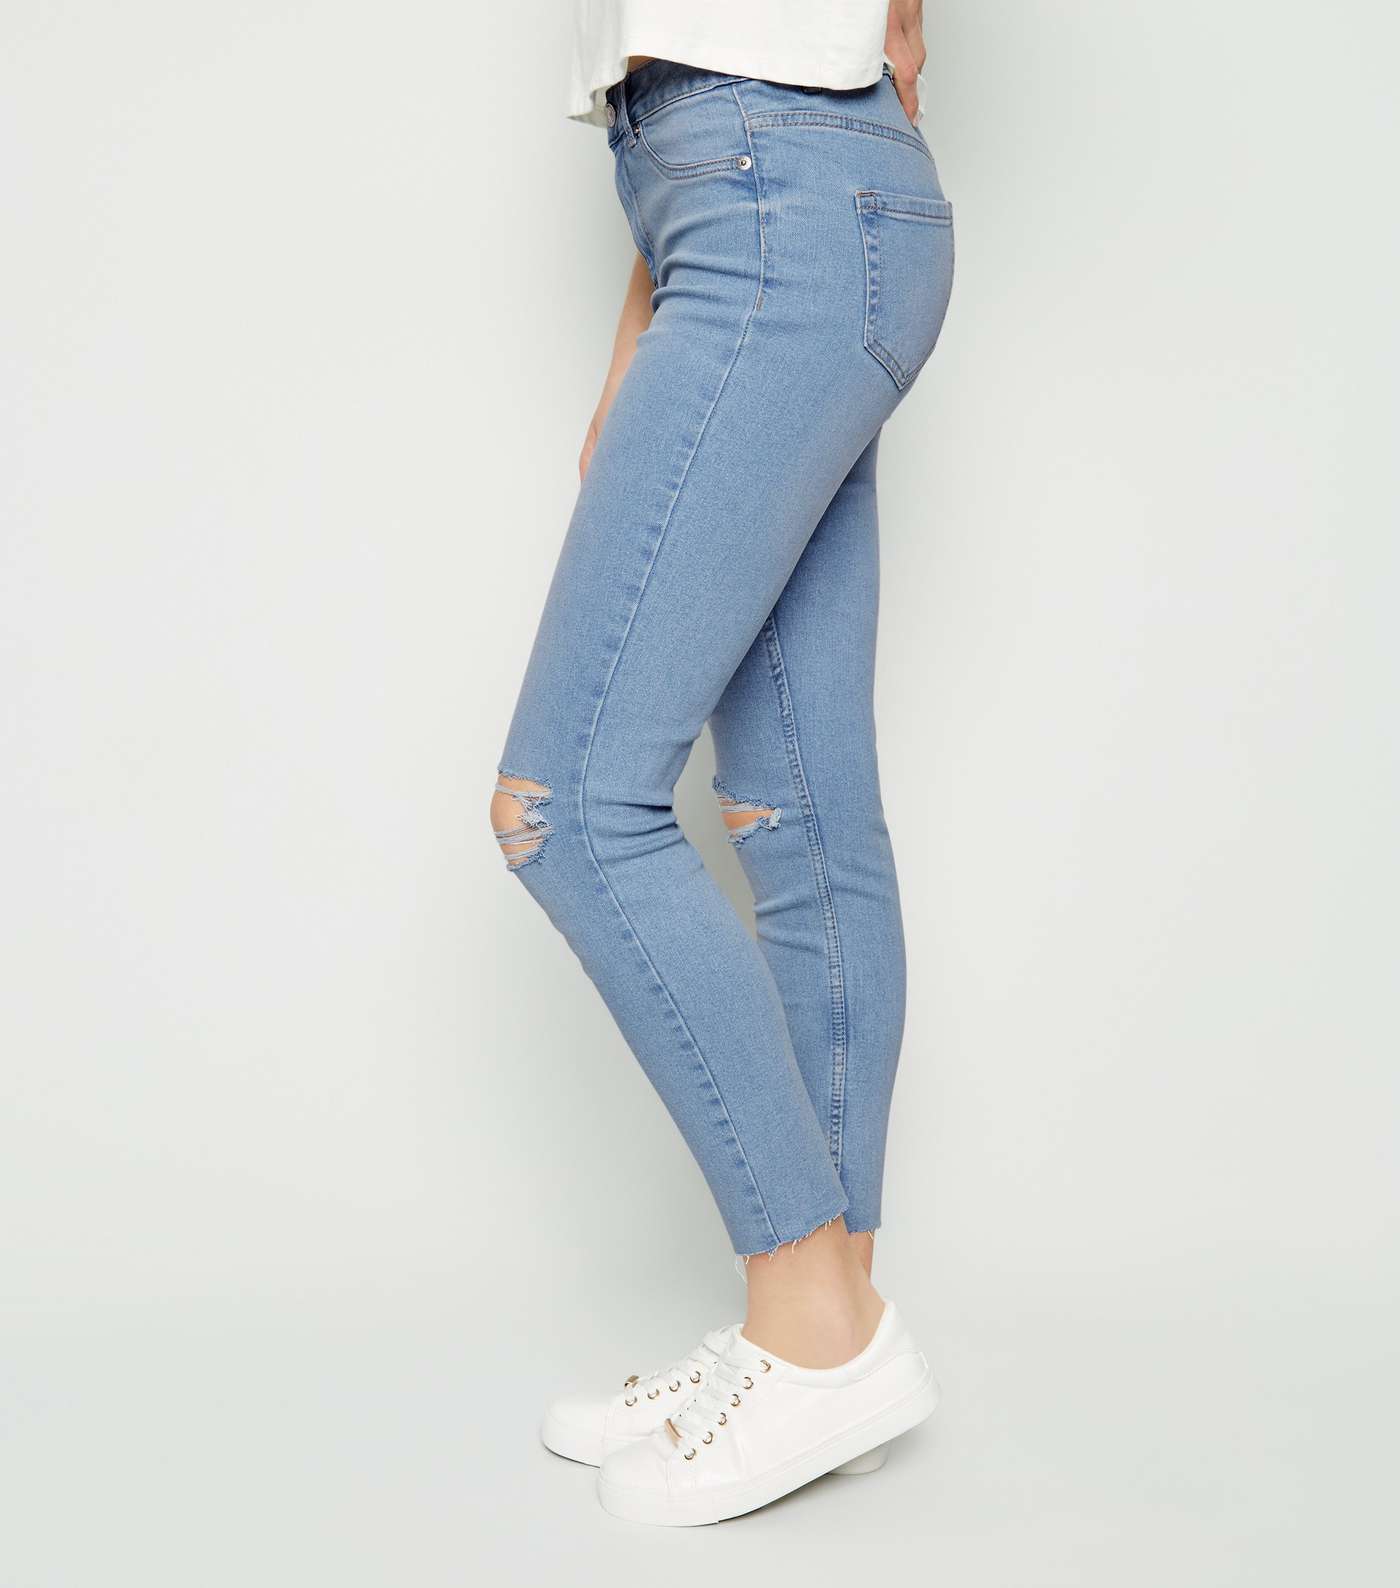 Bright Blue Bleach Wash Ripped Jenna Jeans Image 5